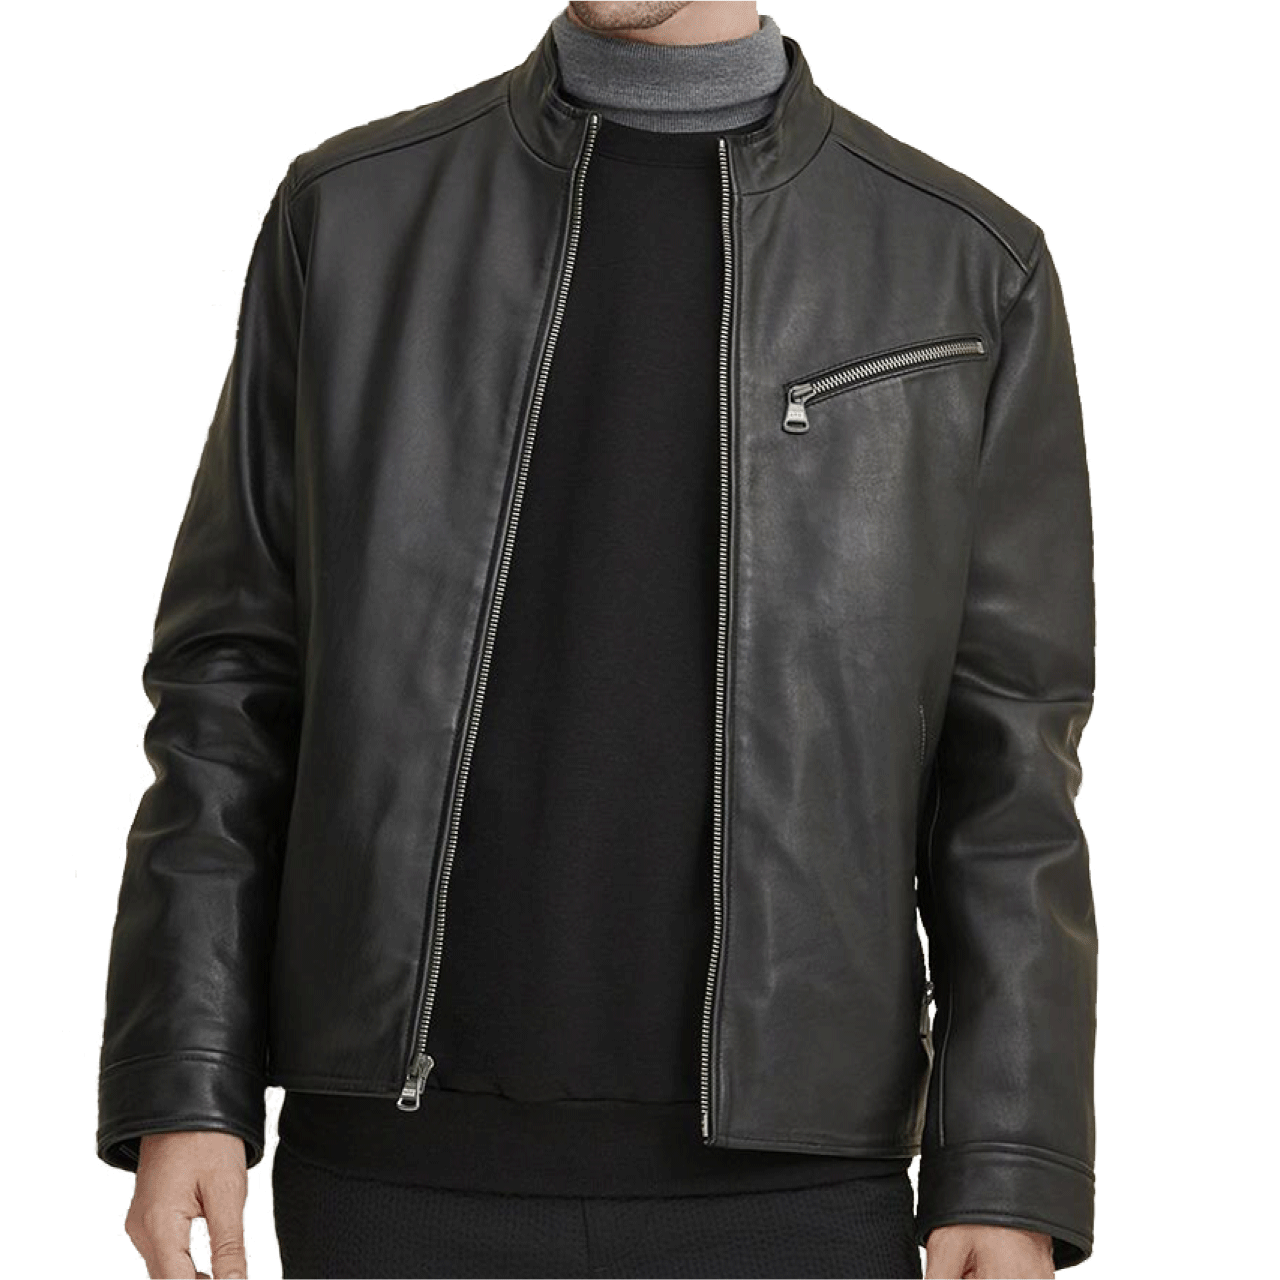 Lambskin Leather Jacket with Diagonal Zipper On Chest